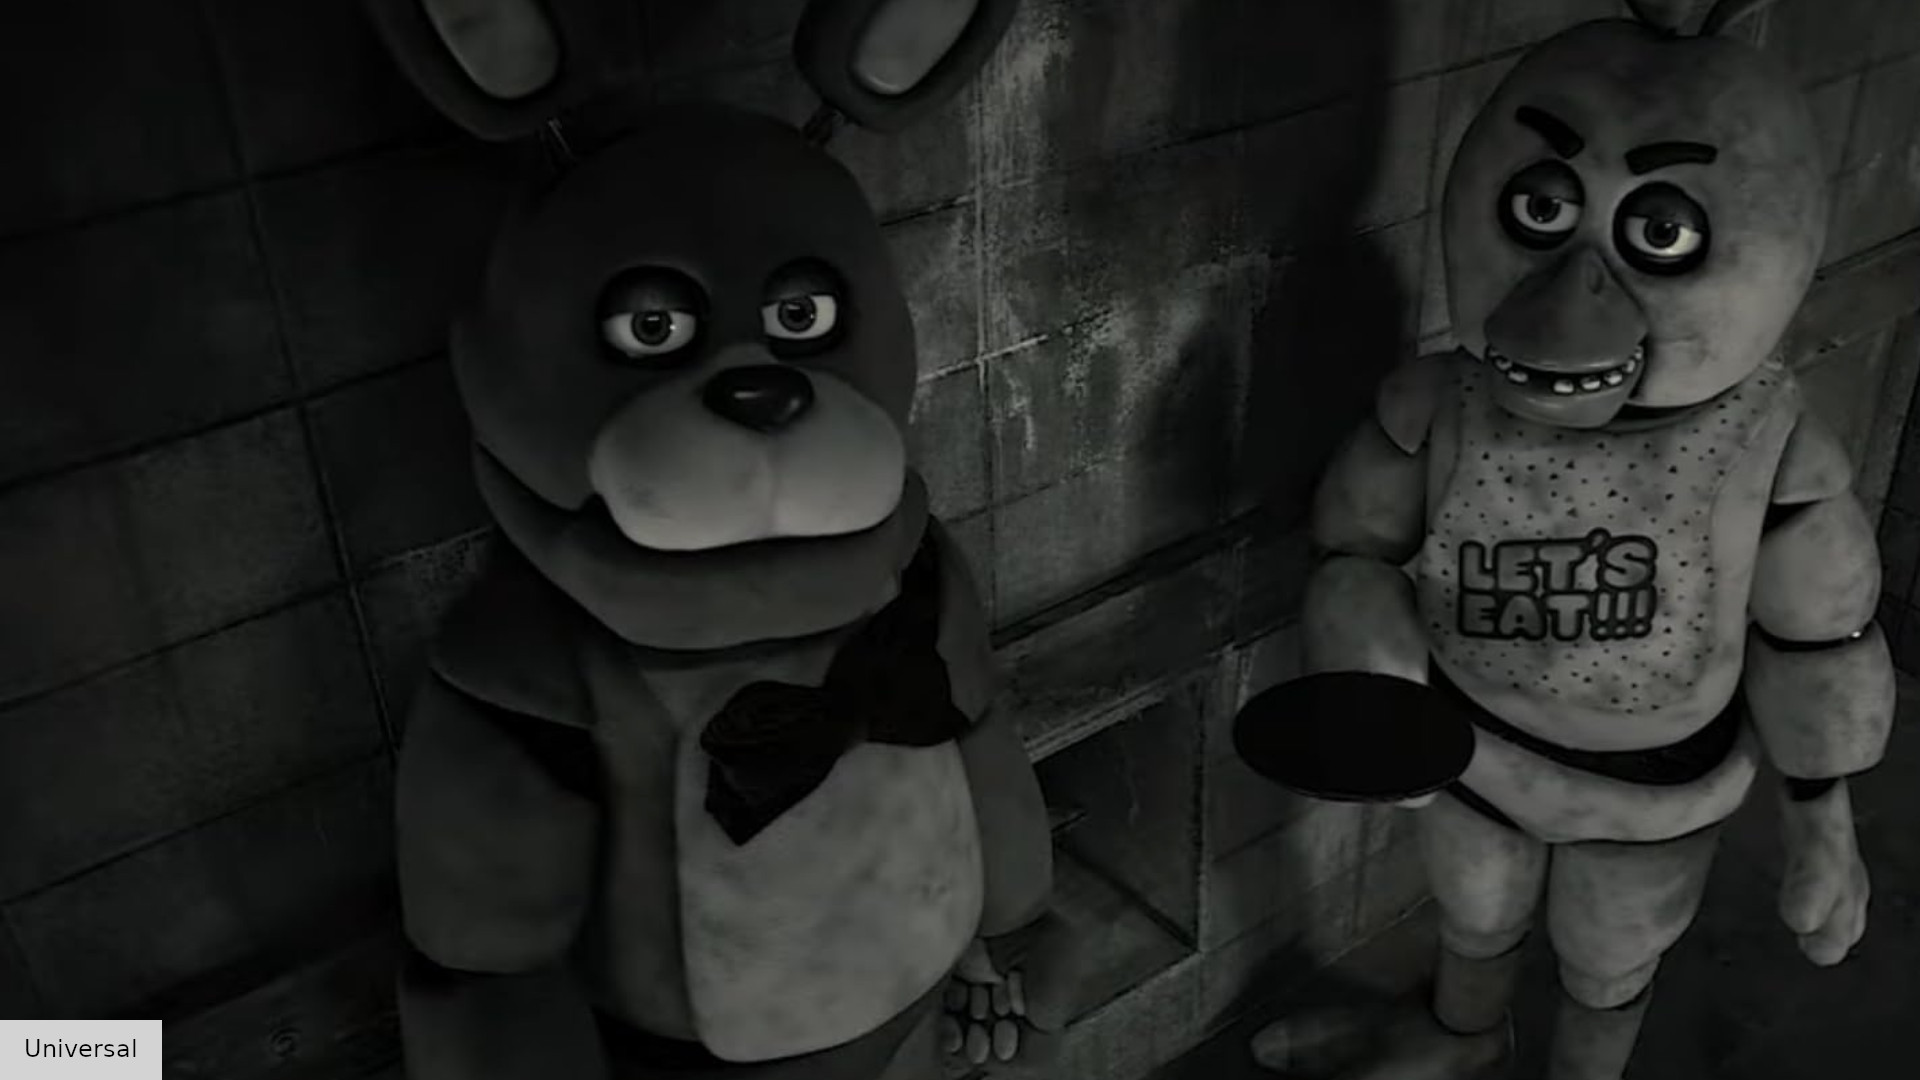 Who's Who in the Five Nights at Freddy's Movie Cast?